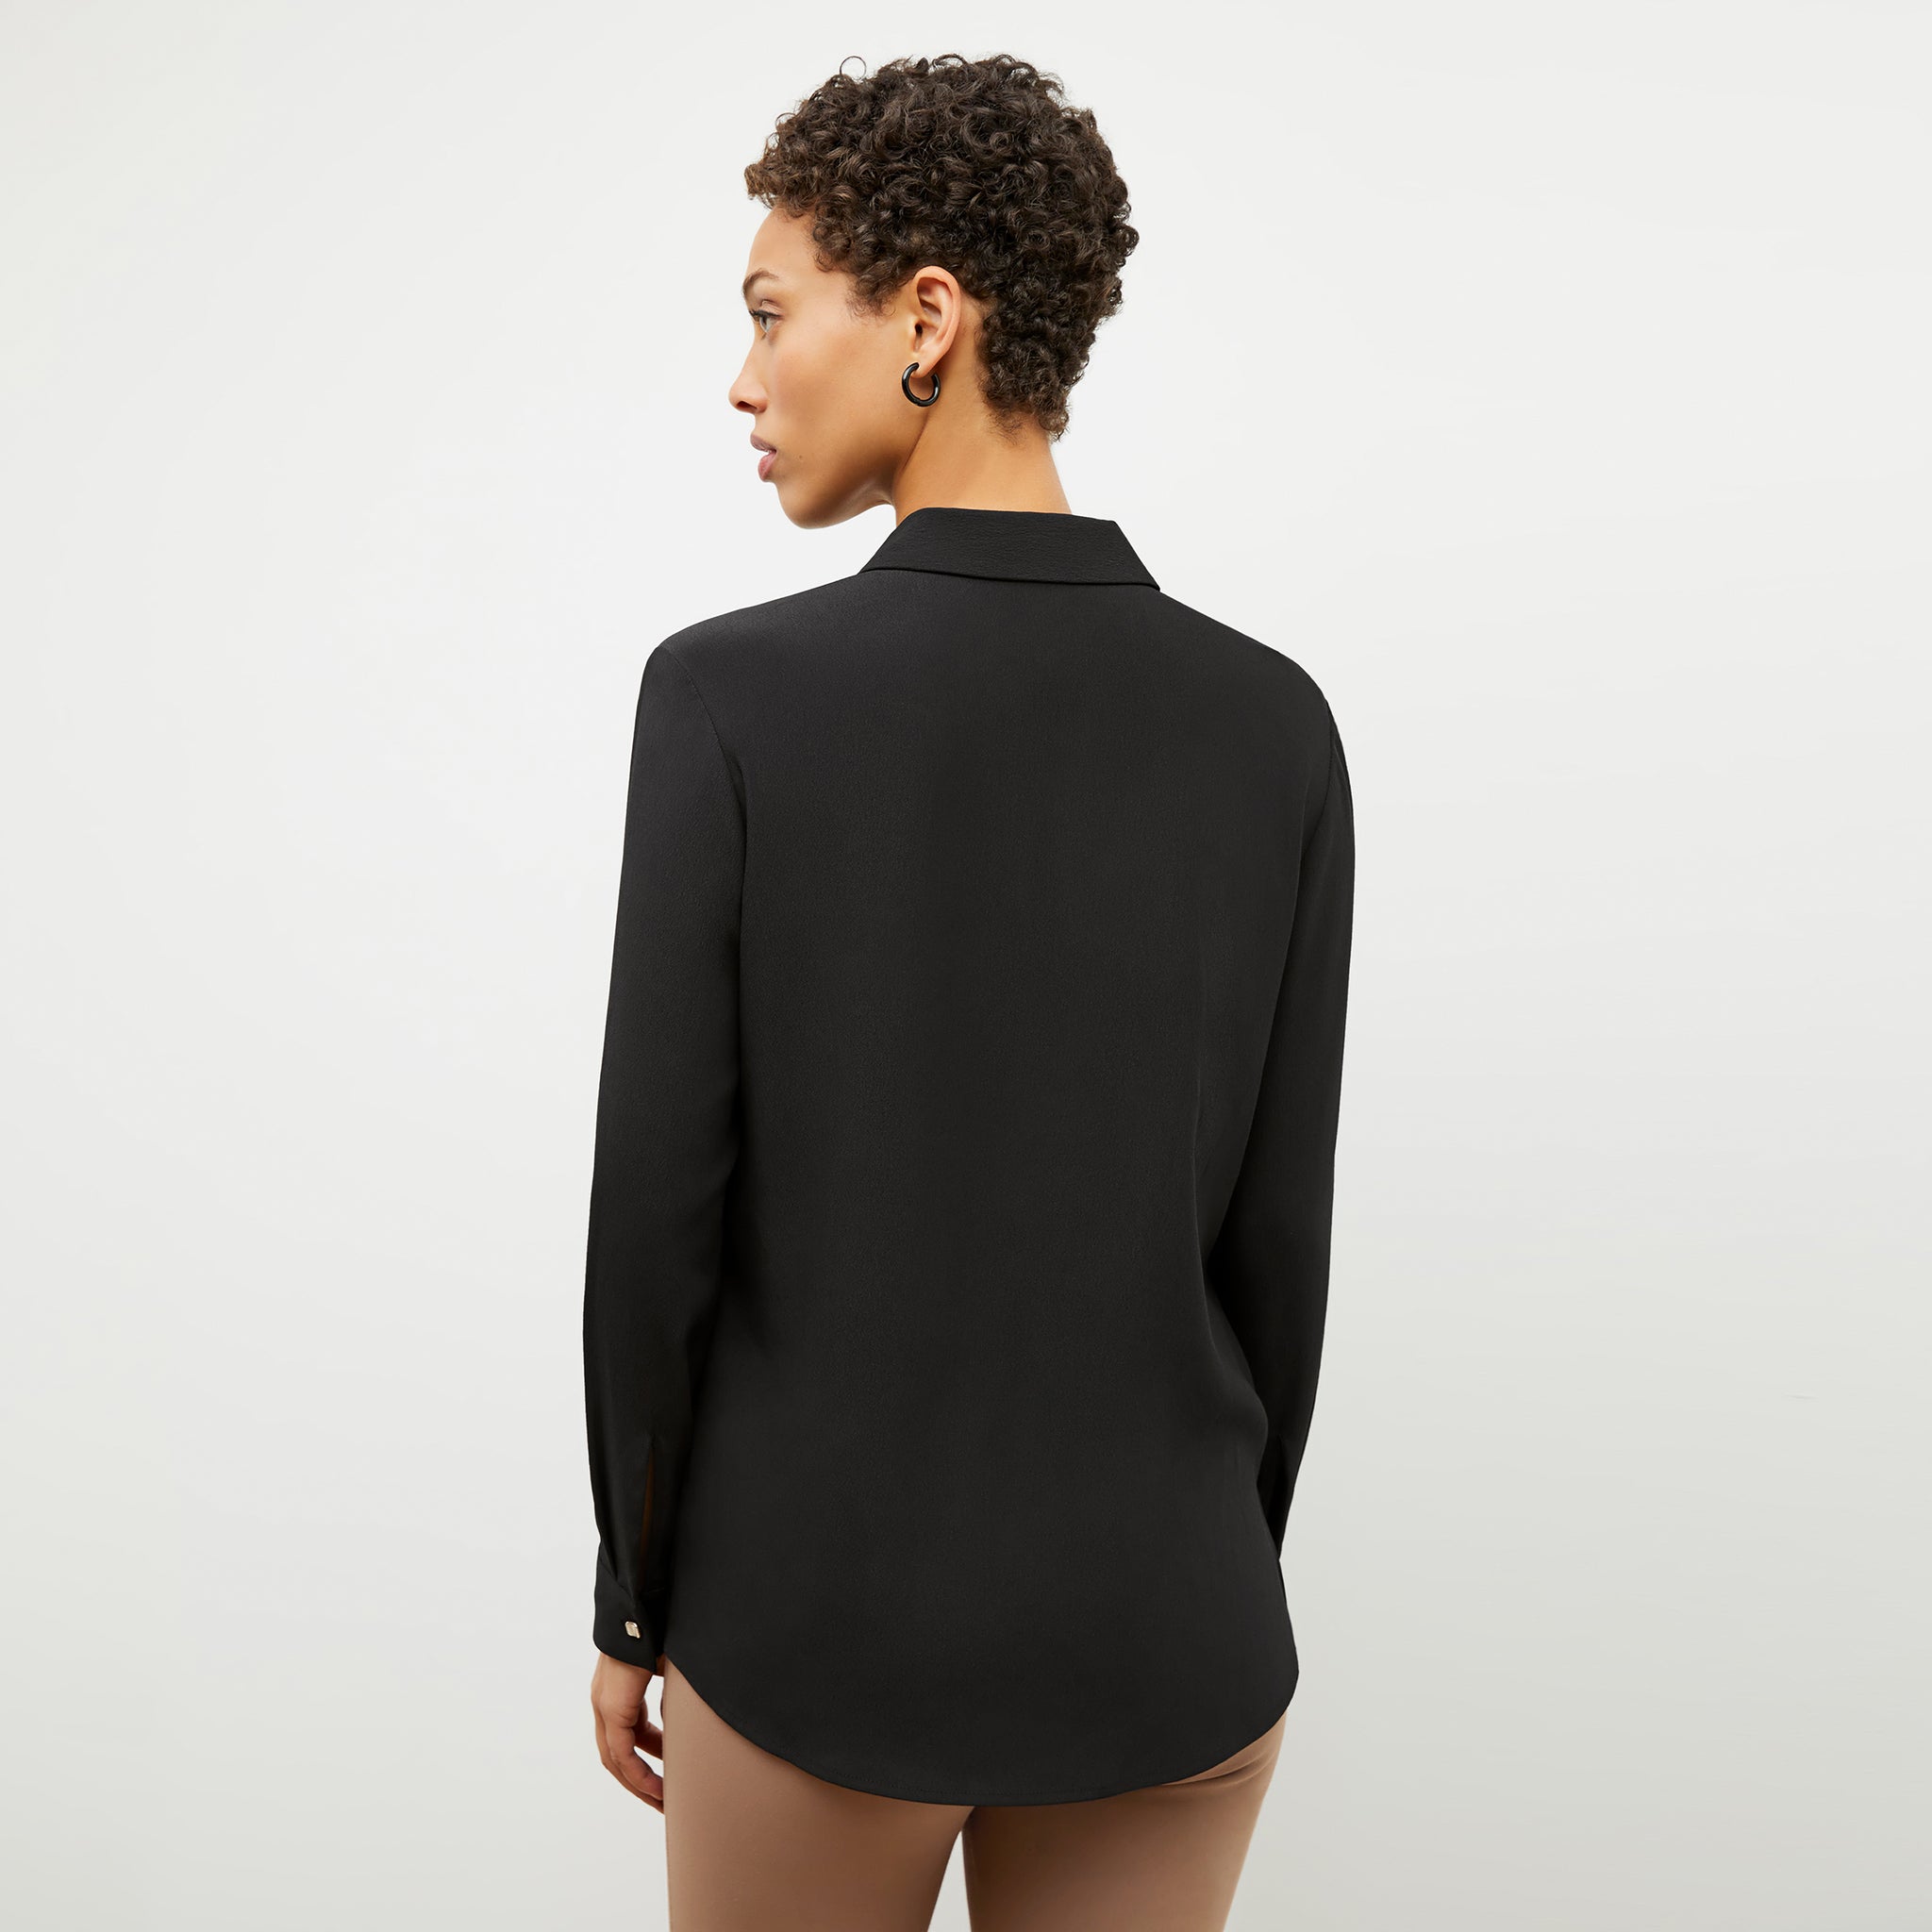 Back image of a woman wearing the lagarde shirt in black